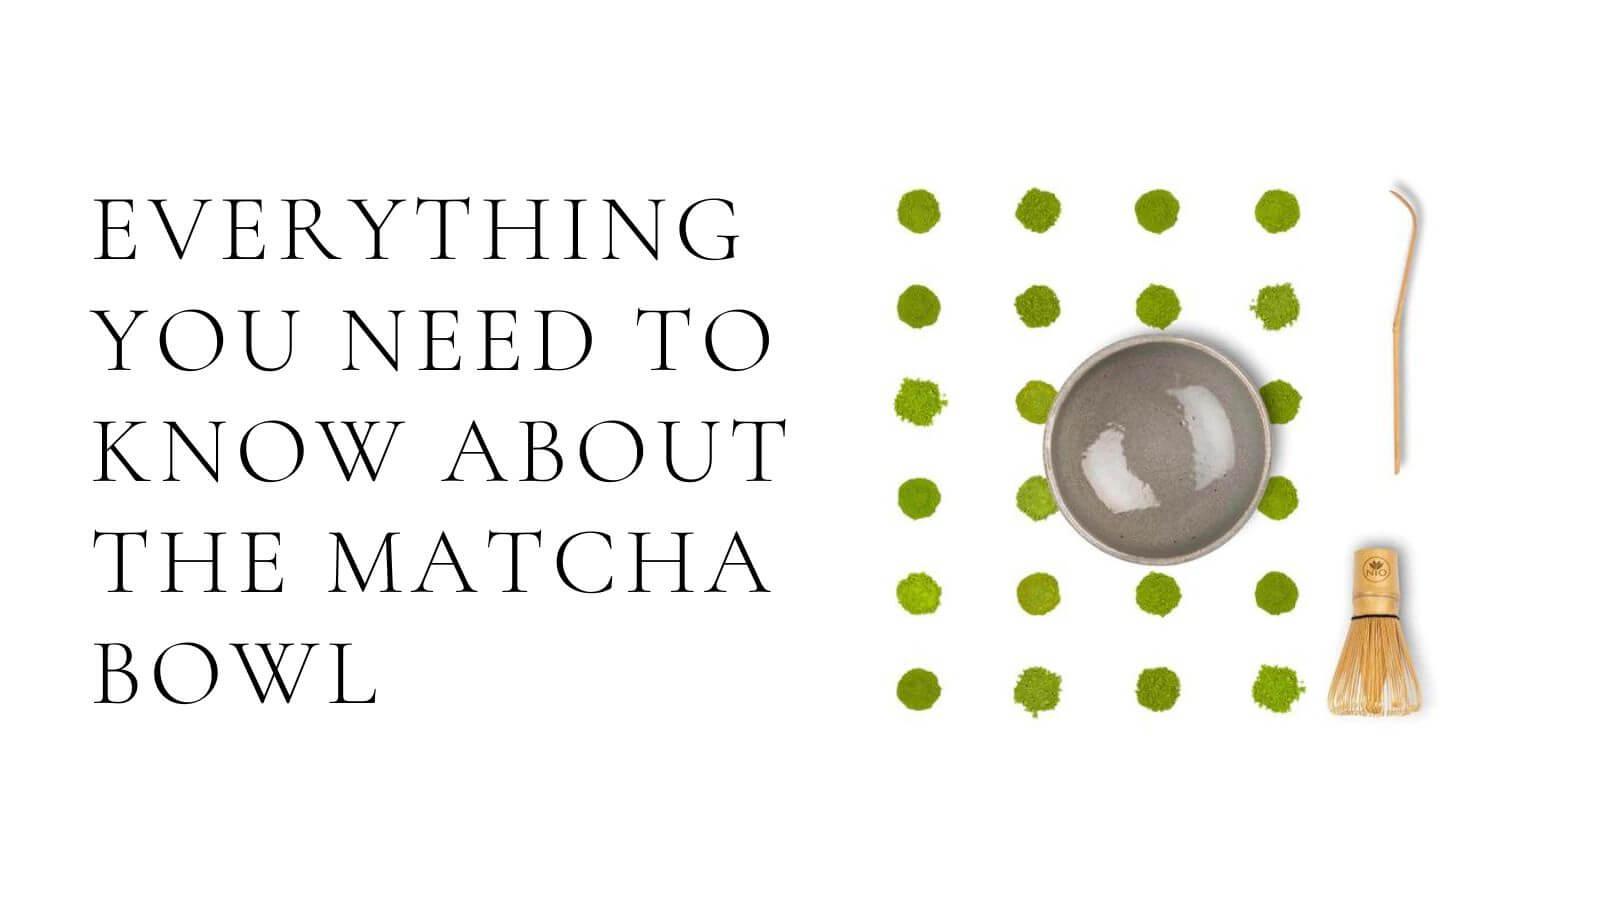 Load video: How to prepare a matcha bowl step by step